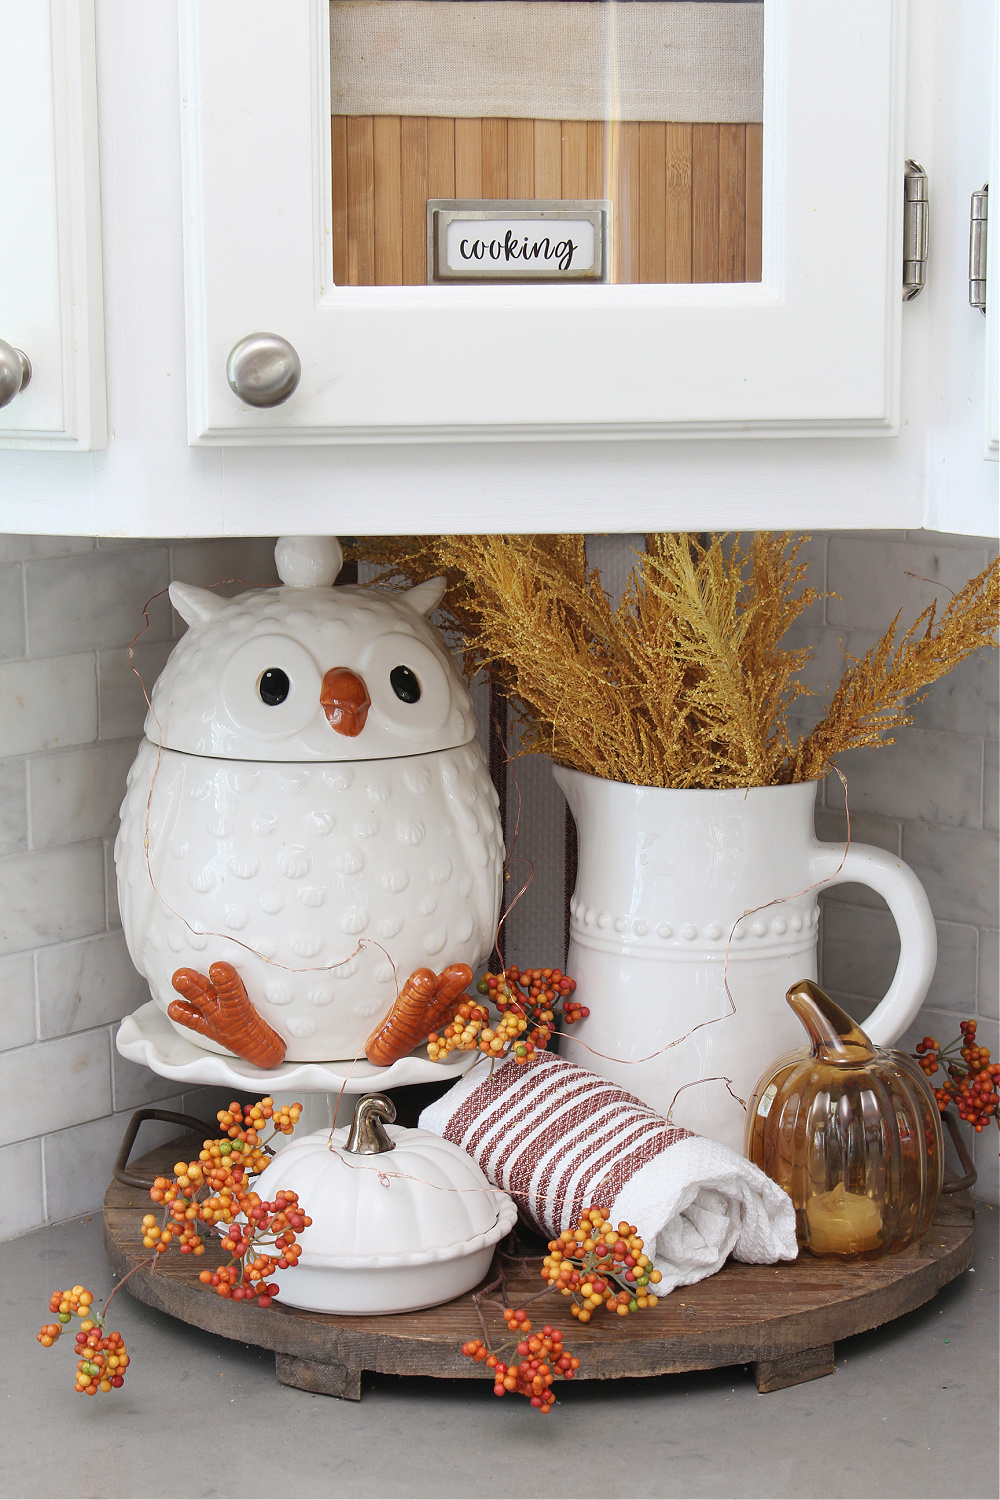 Cute fall kitchen vignette with owl cookie jar.